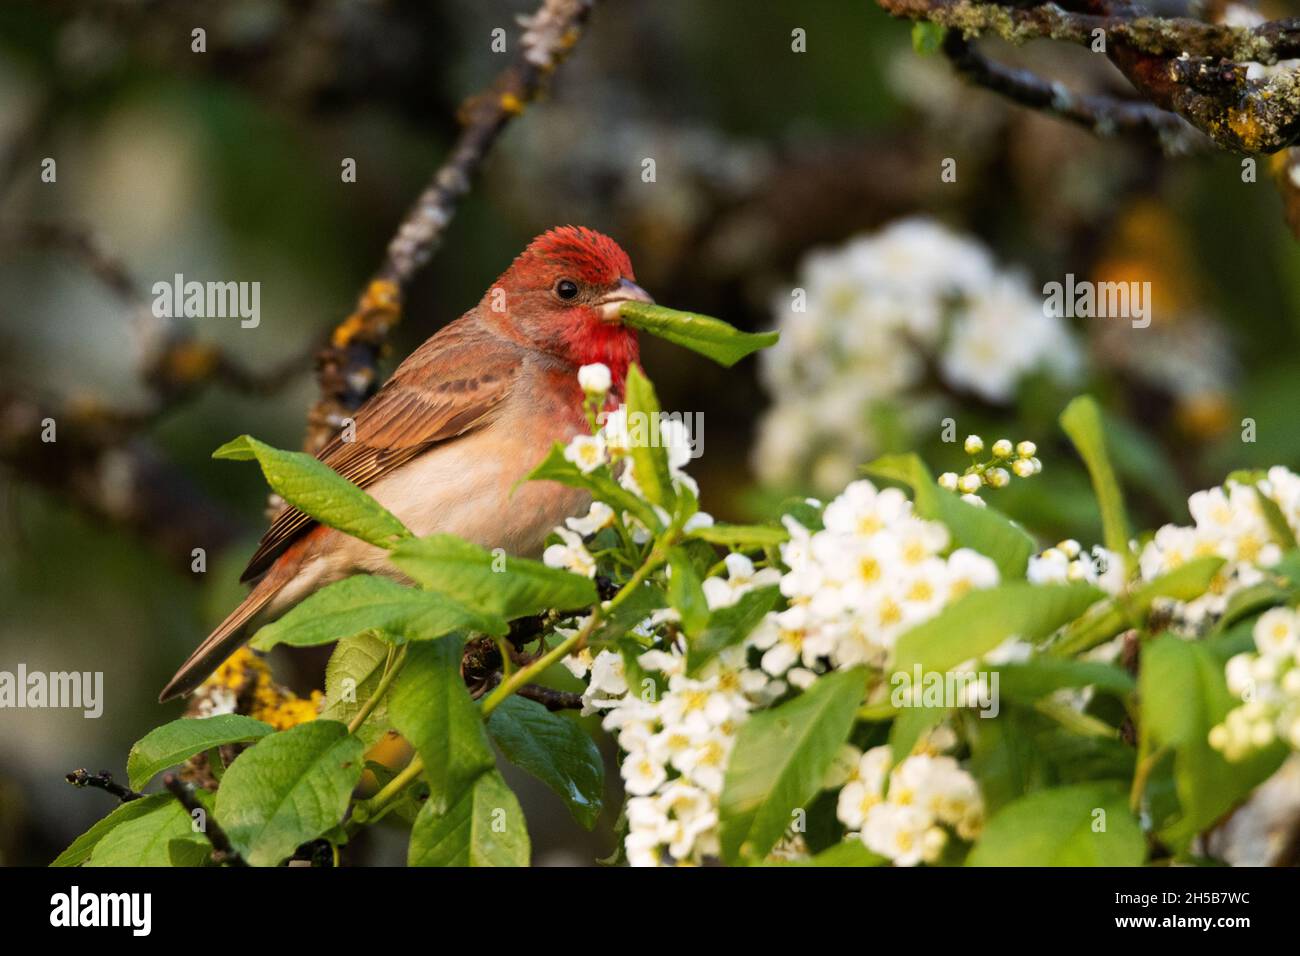 Male Common rosefinch, Carpodacus erythrinus eating a fresh leaf in the middle of Bird cherry blossoms. Stock Photo